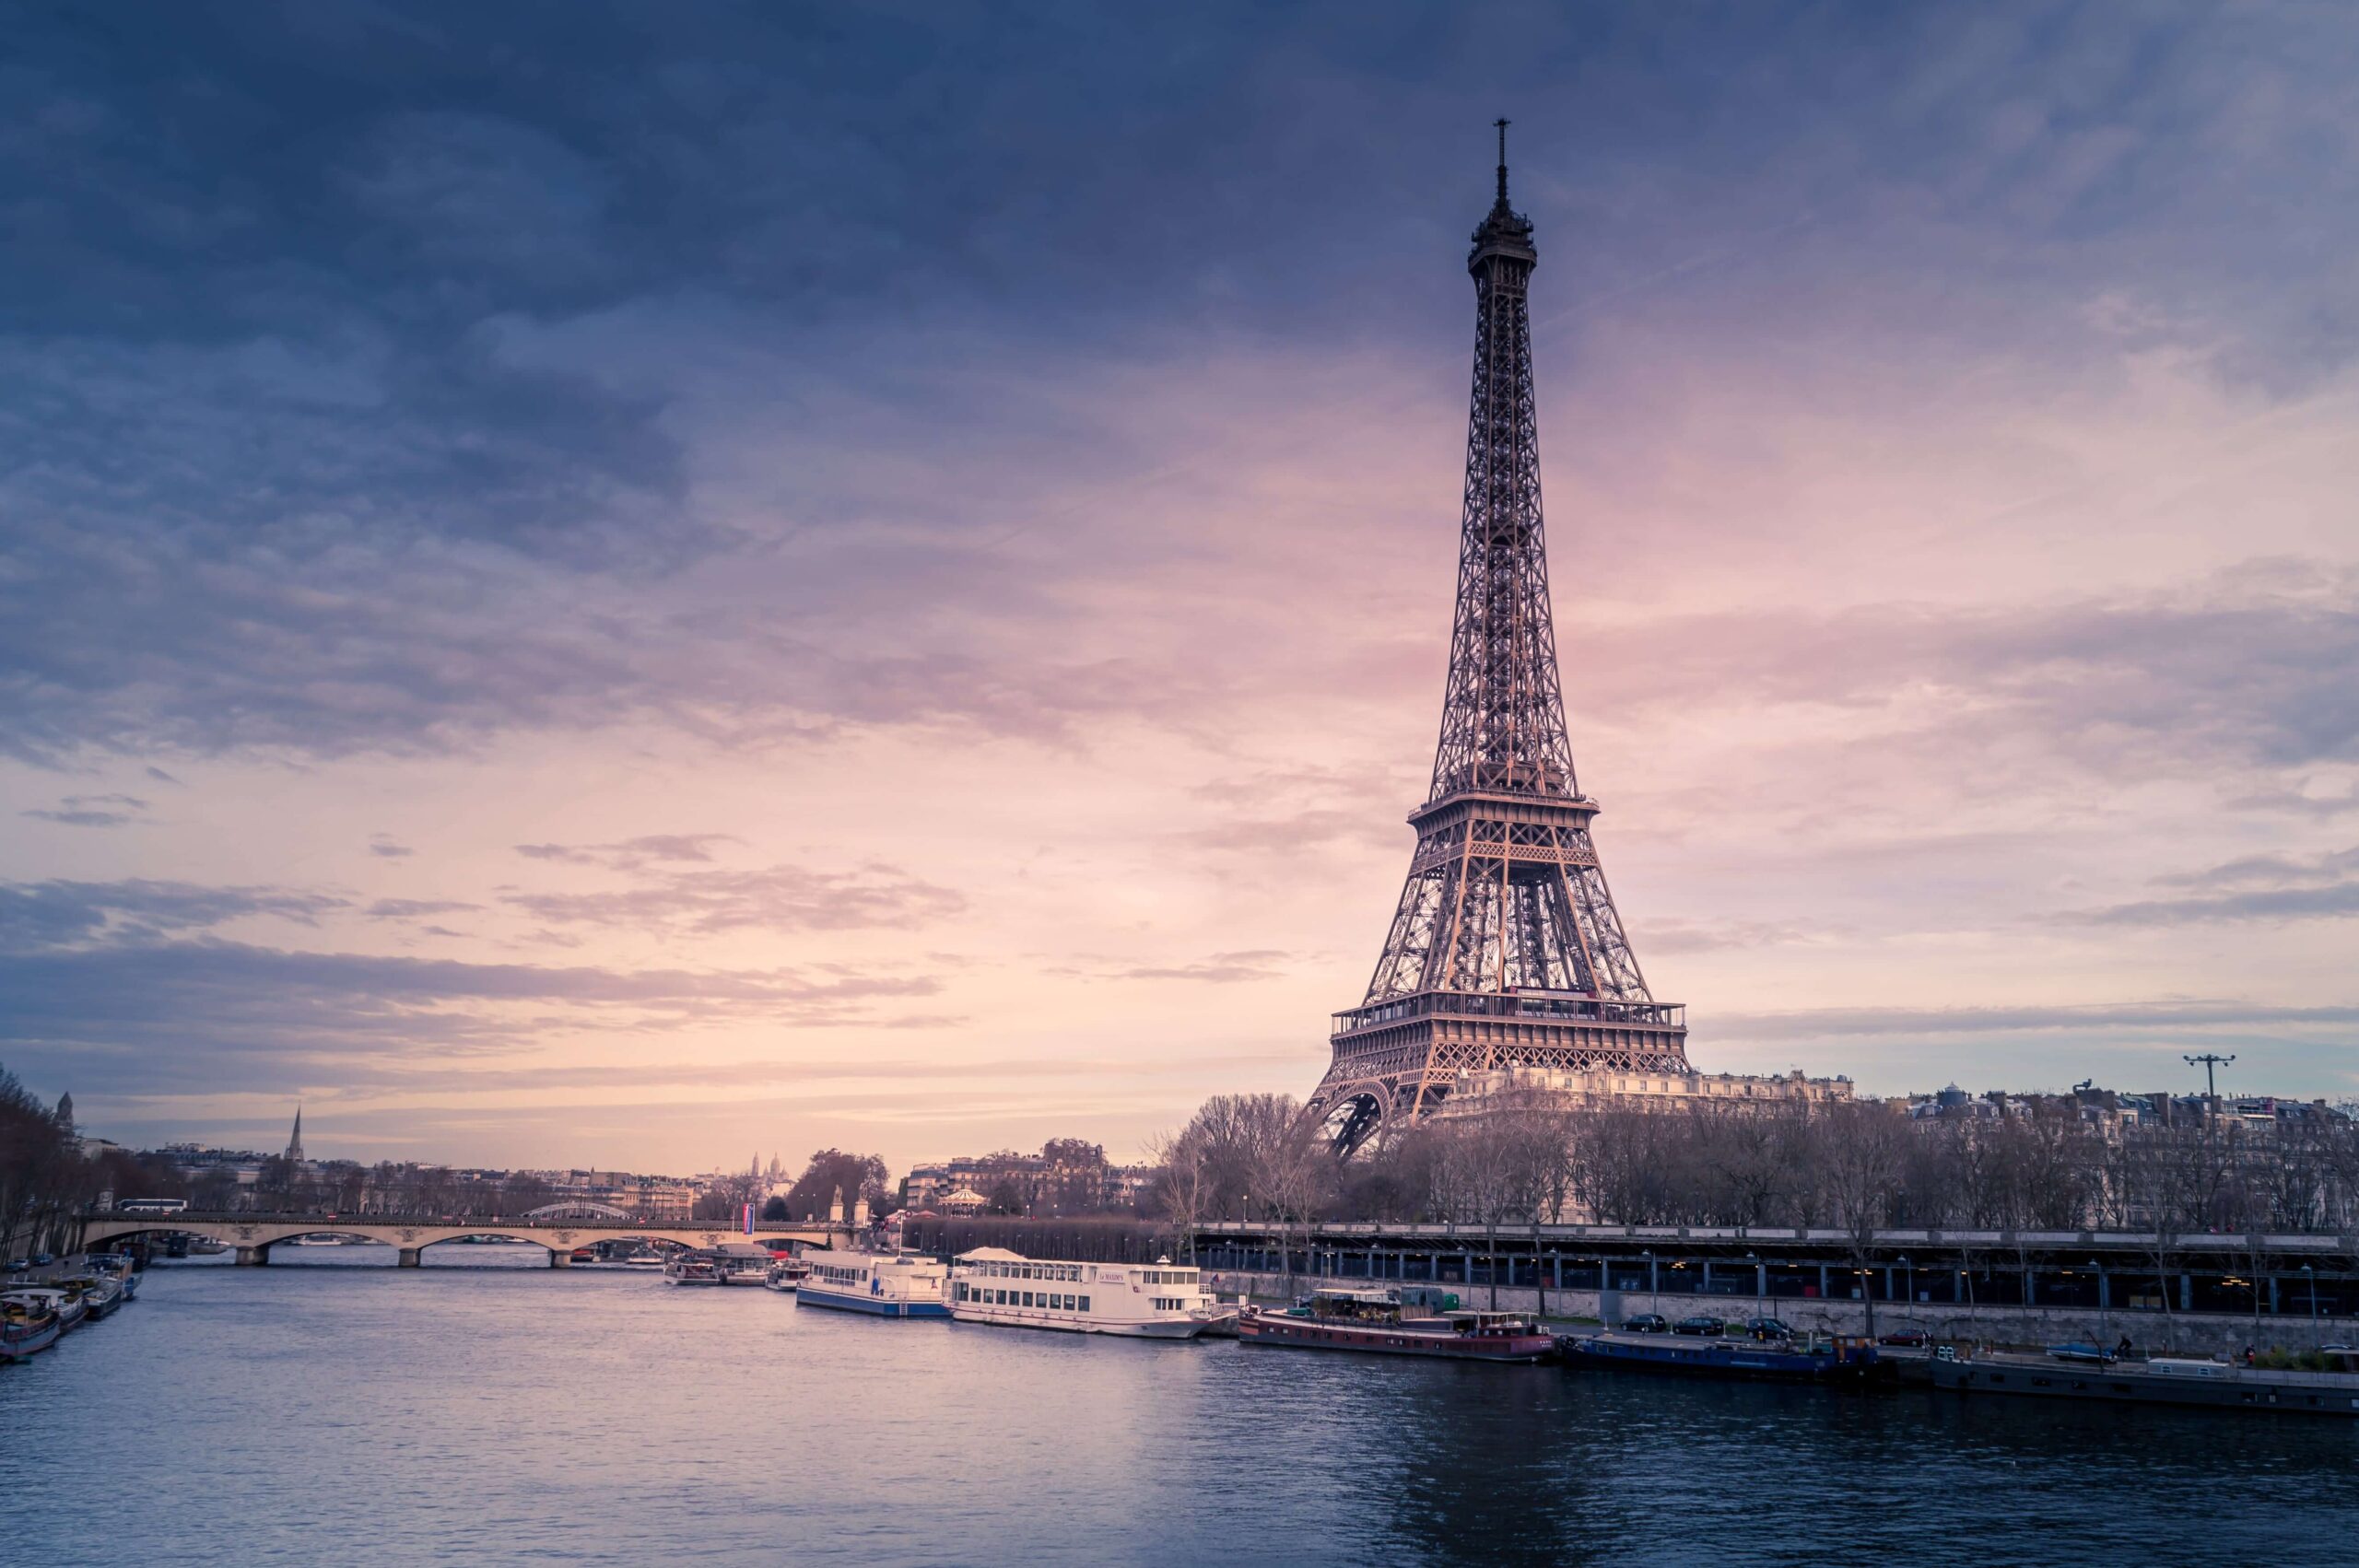 2. Residency Renewal Process for Expats in France